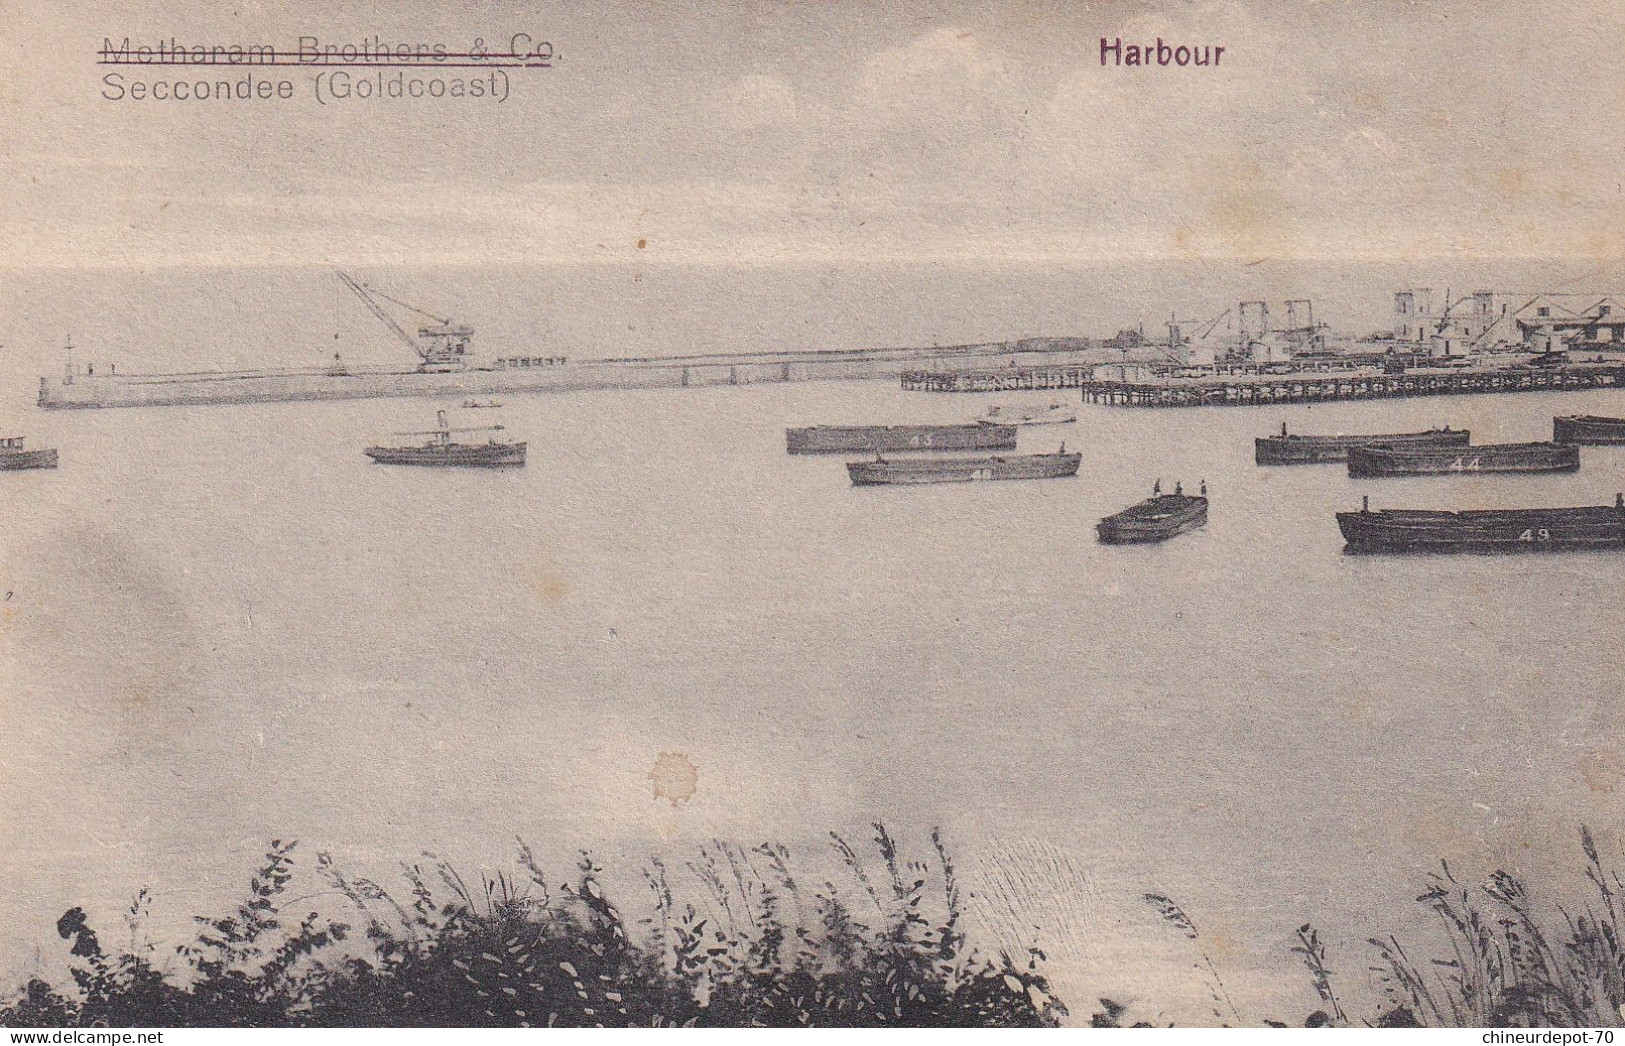 Metharam Brothers & Co Seccondee (Goldcoast) Harbour Port - Ghana - Gold Coast